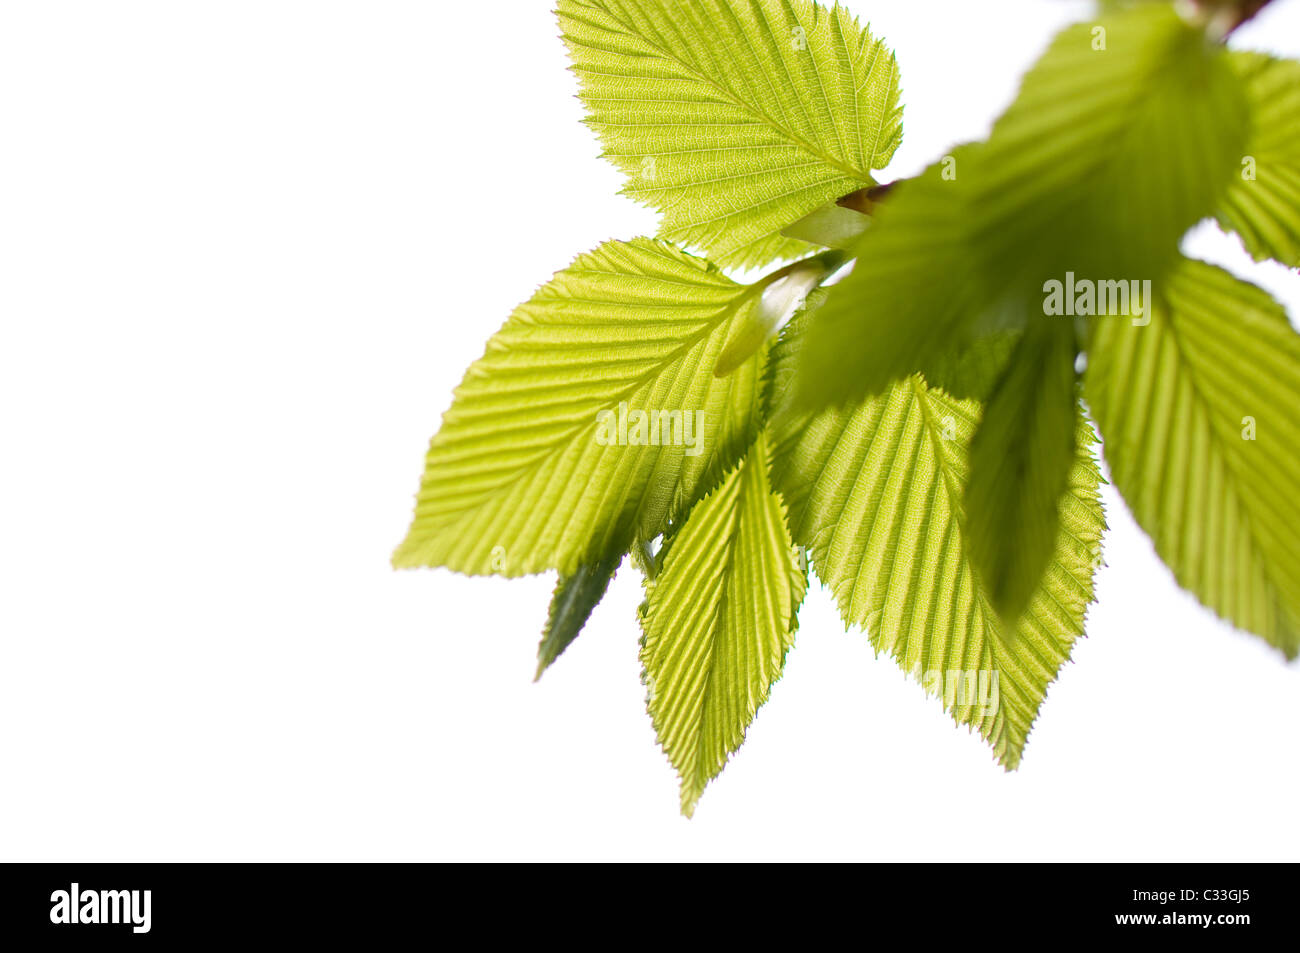 Ulmus or elm green young leaves Stock Photo